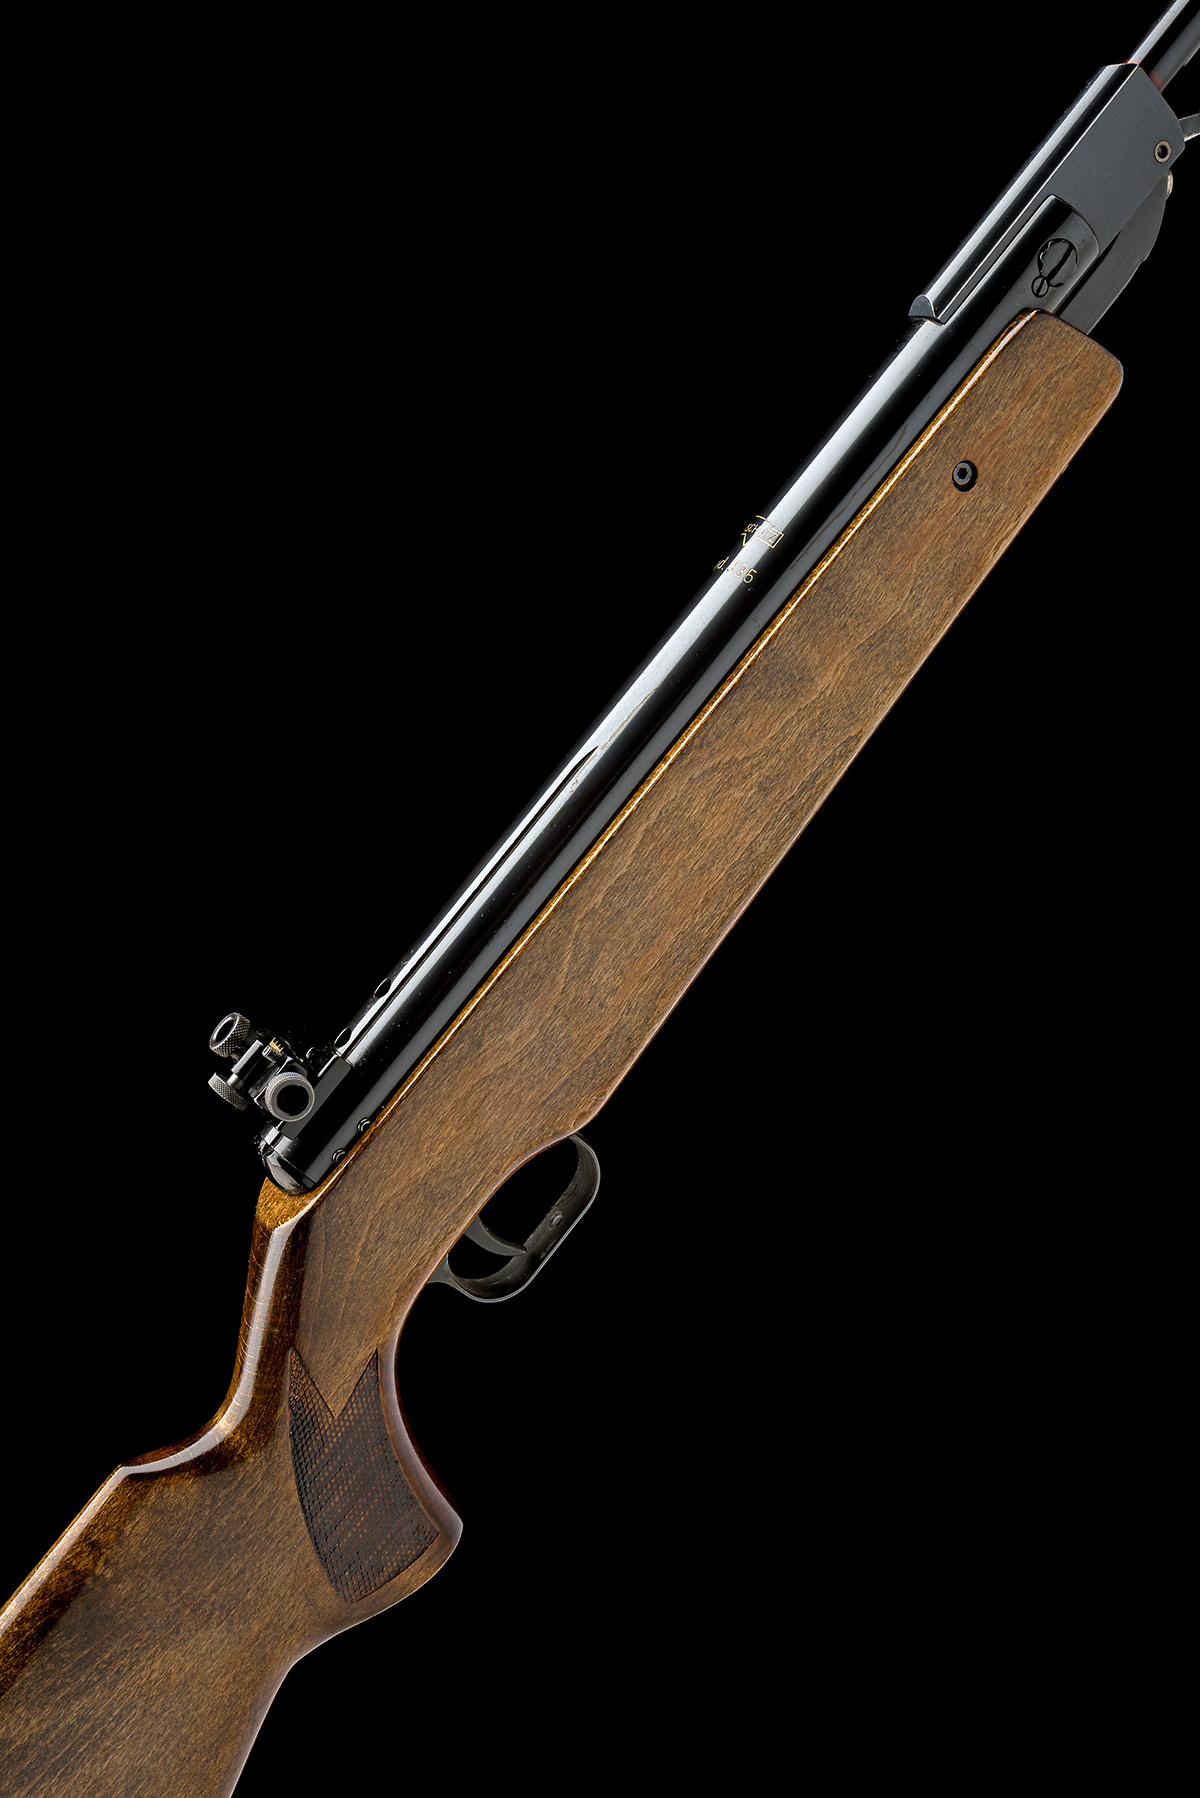 A SCARCE .177 ANSCHUTZ 335 TARGET BREAK-BARREL AIR-RIFLE, serial no. 87781, one of a small number